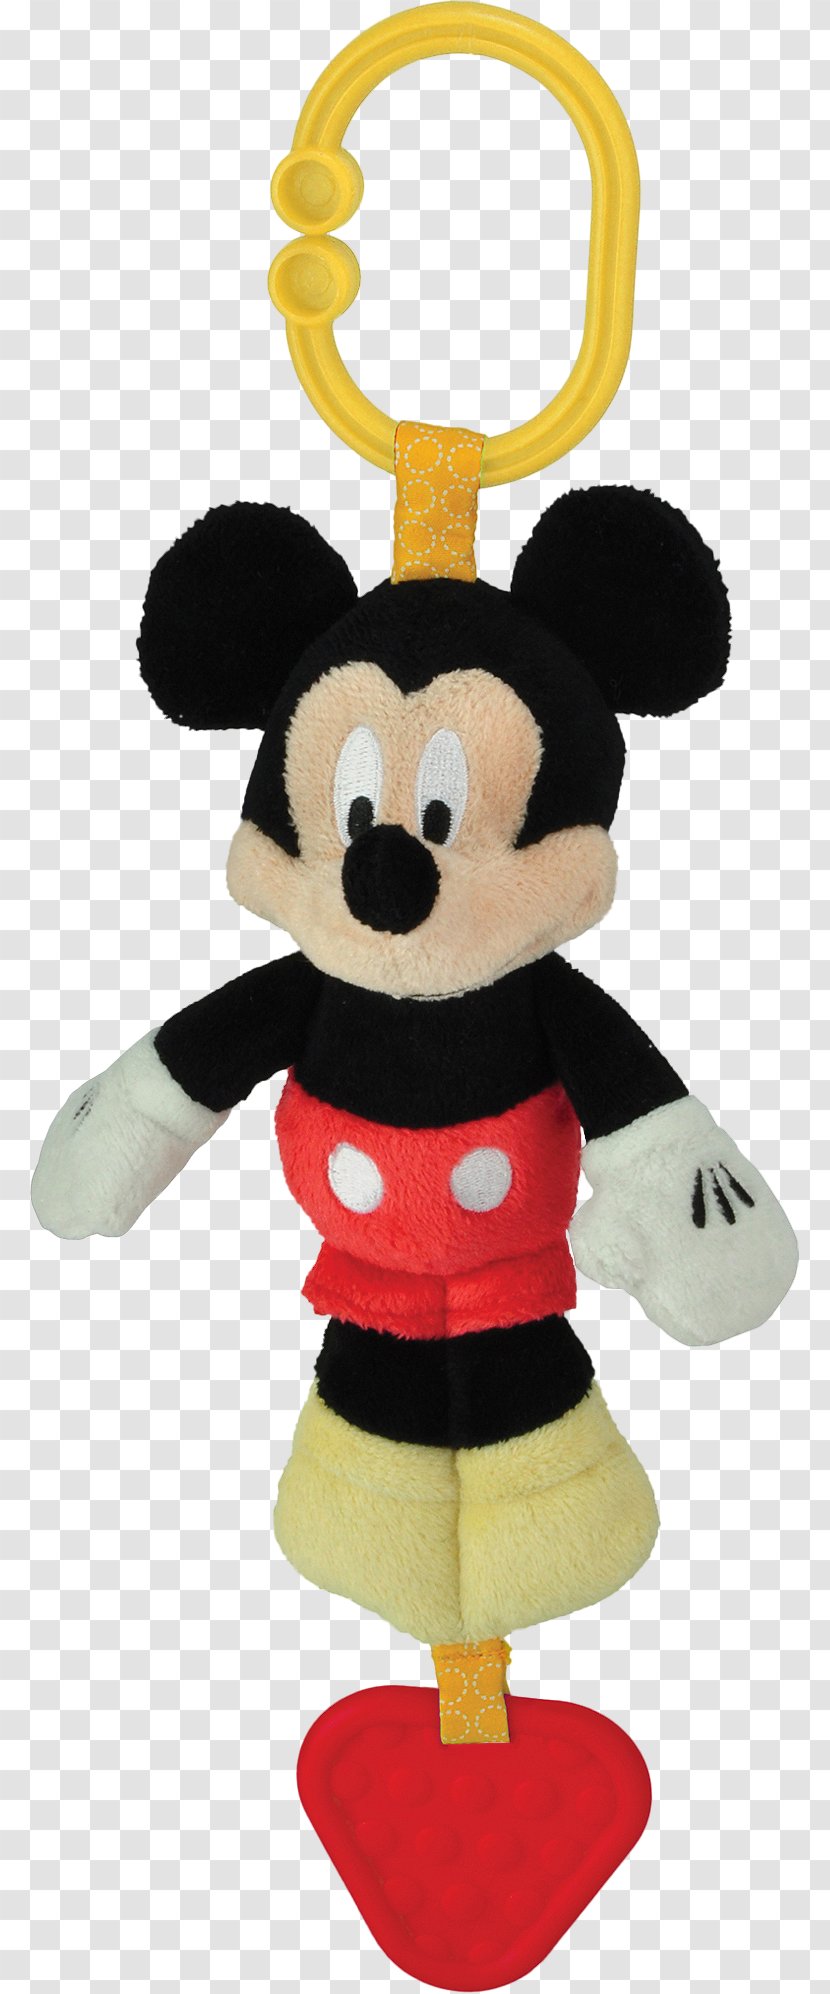 Mickey Mouse Minnie Stuffed Animals & Cuddly Toys Infant - Cartoon Transparent PNG